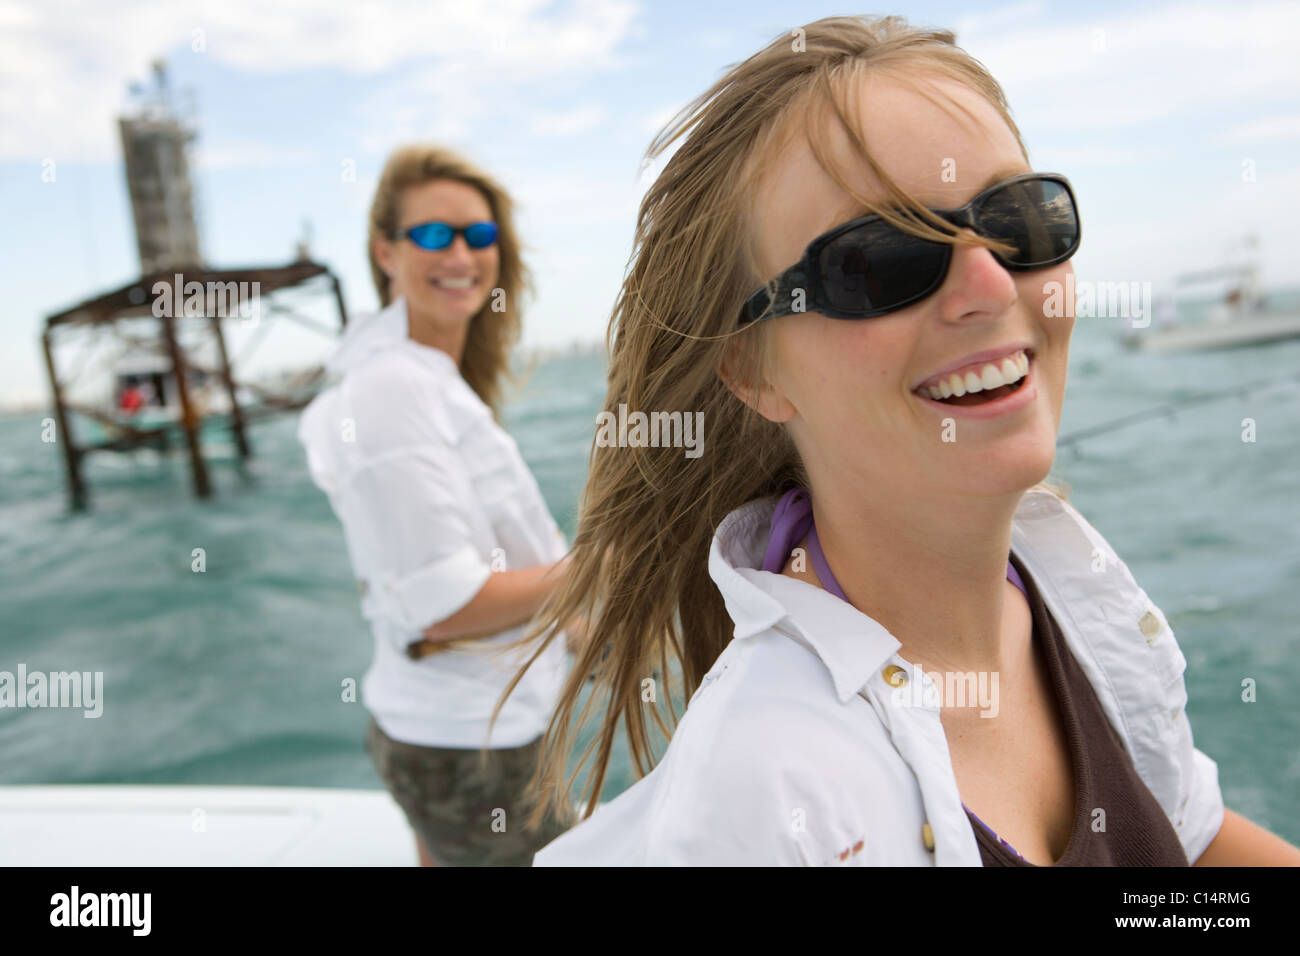 Two women are smiling at the camera with sunglasses while on a boat in the ocean. Stock Photo